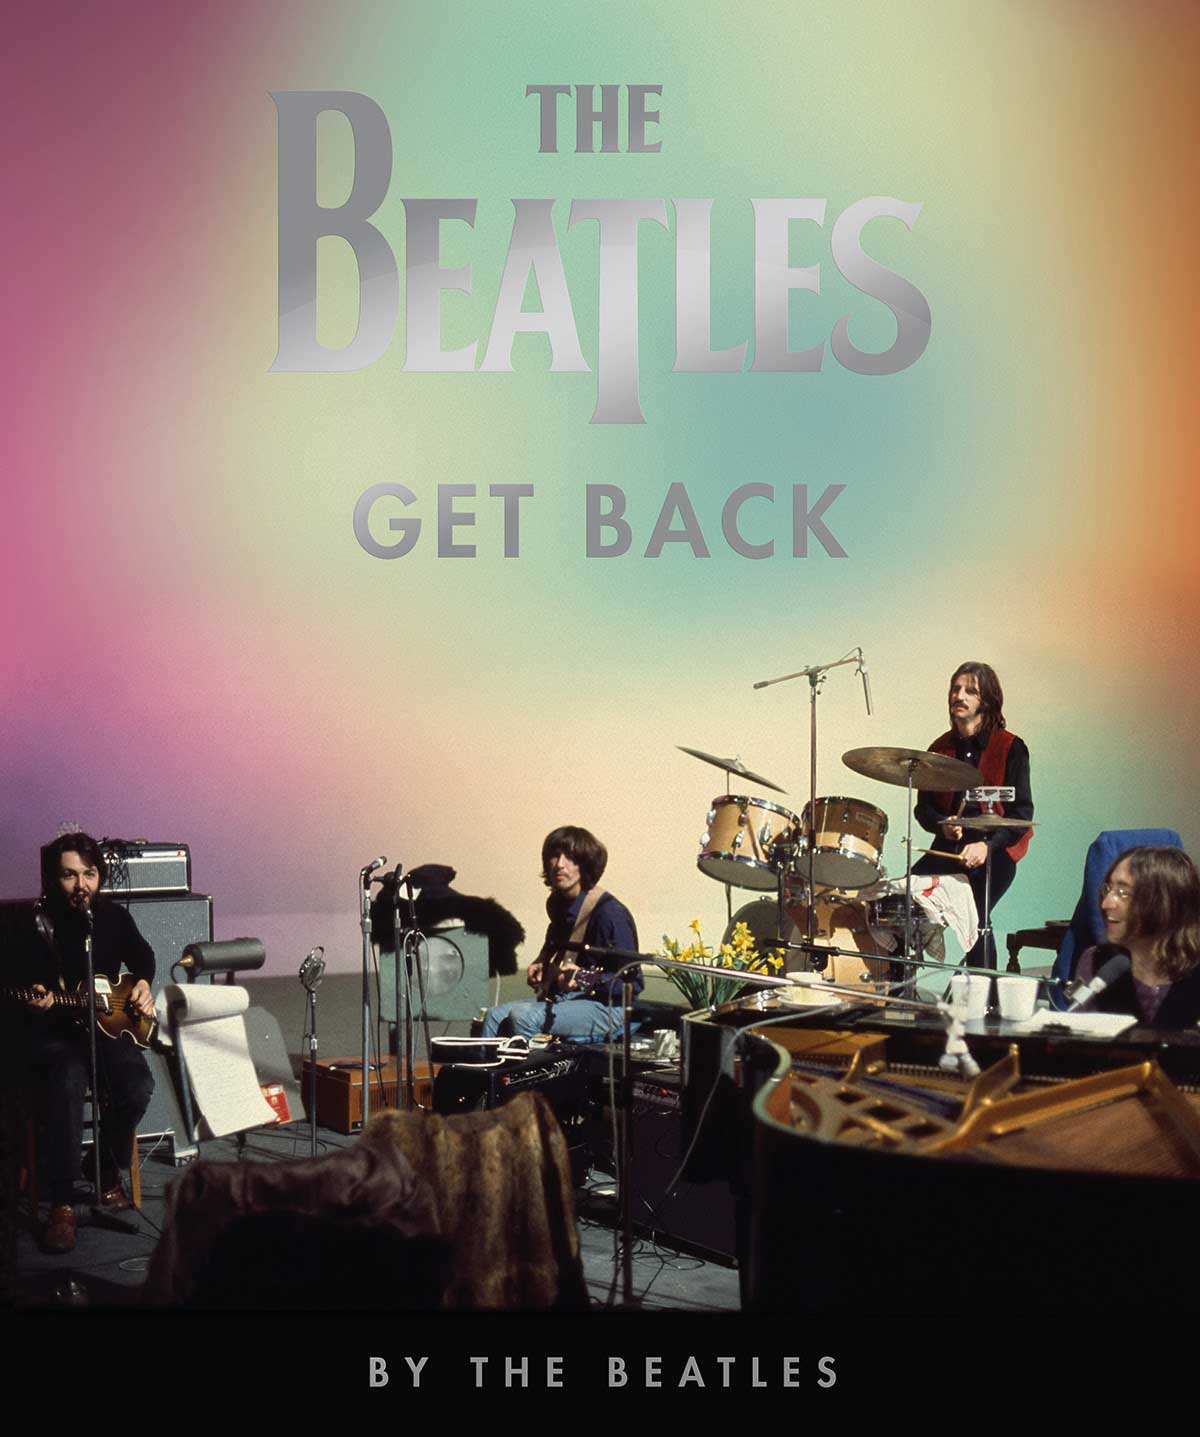 The Beatles: Get Back book announced